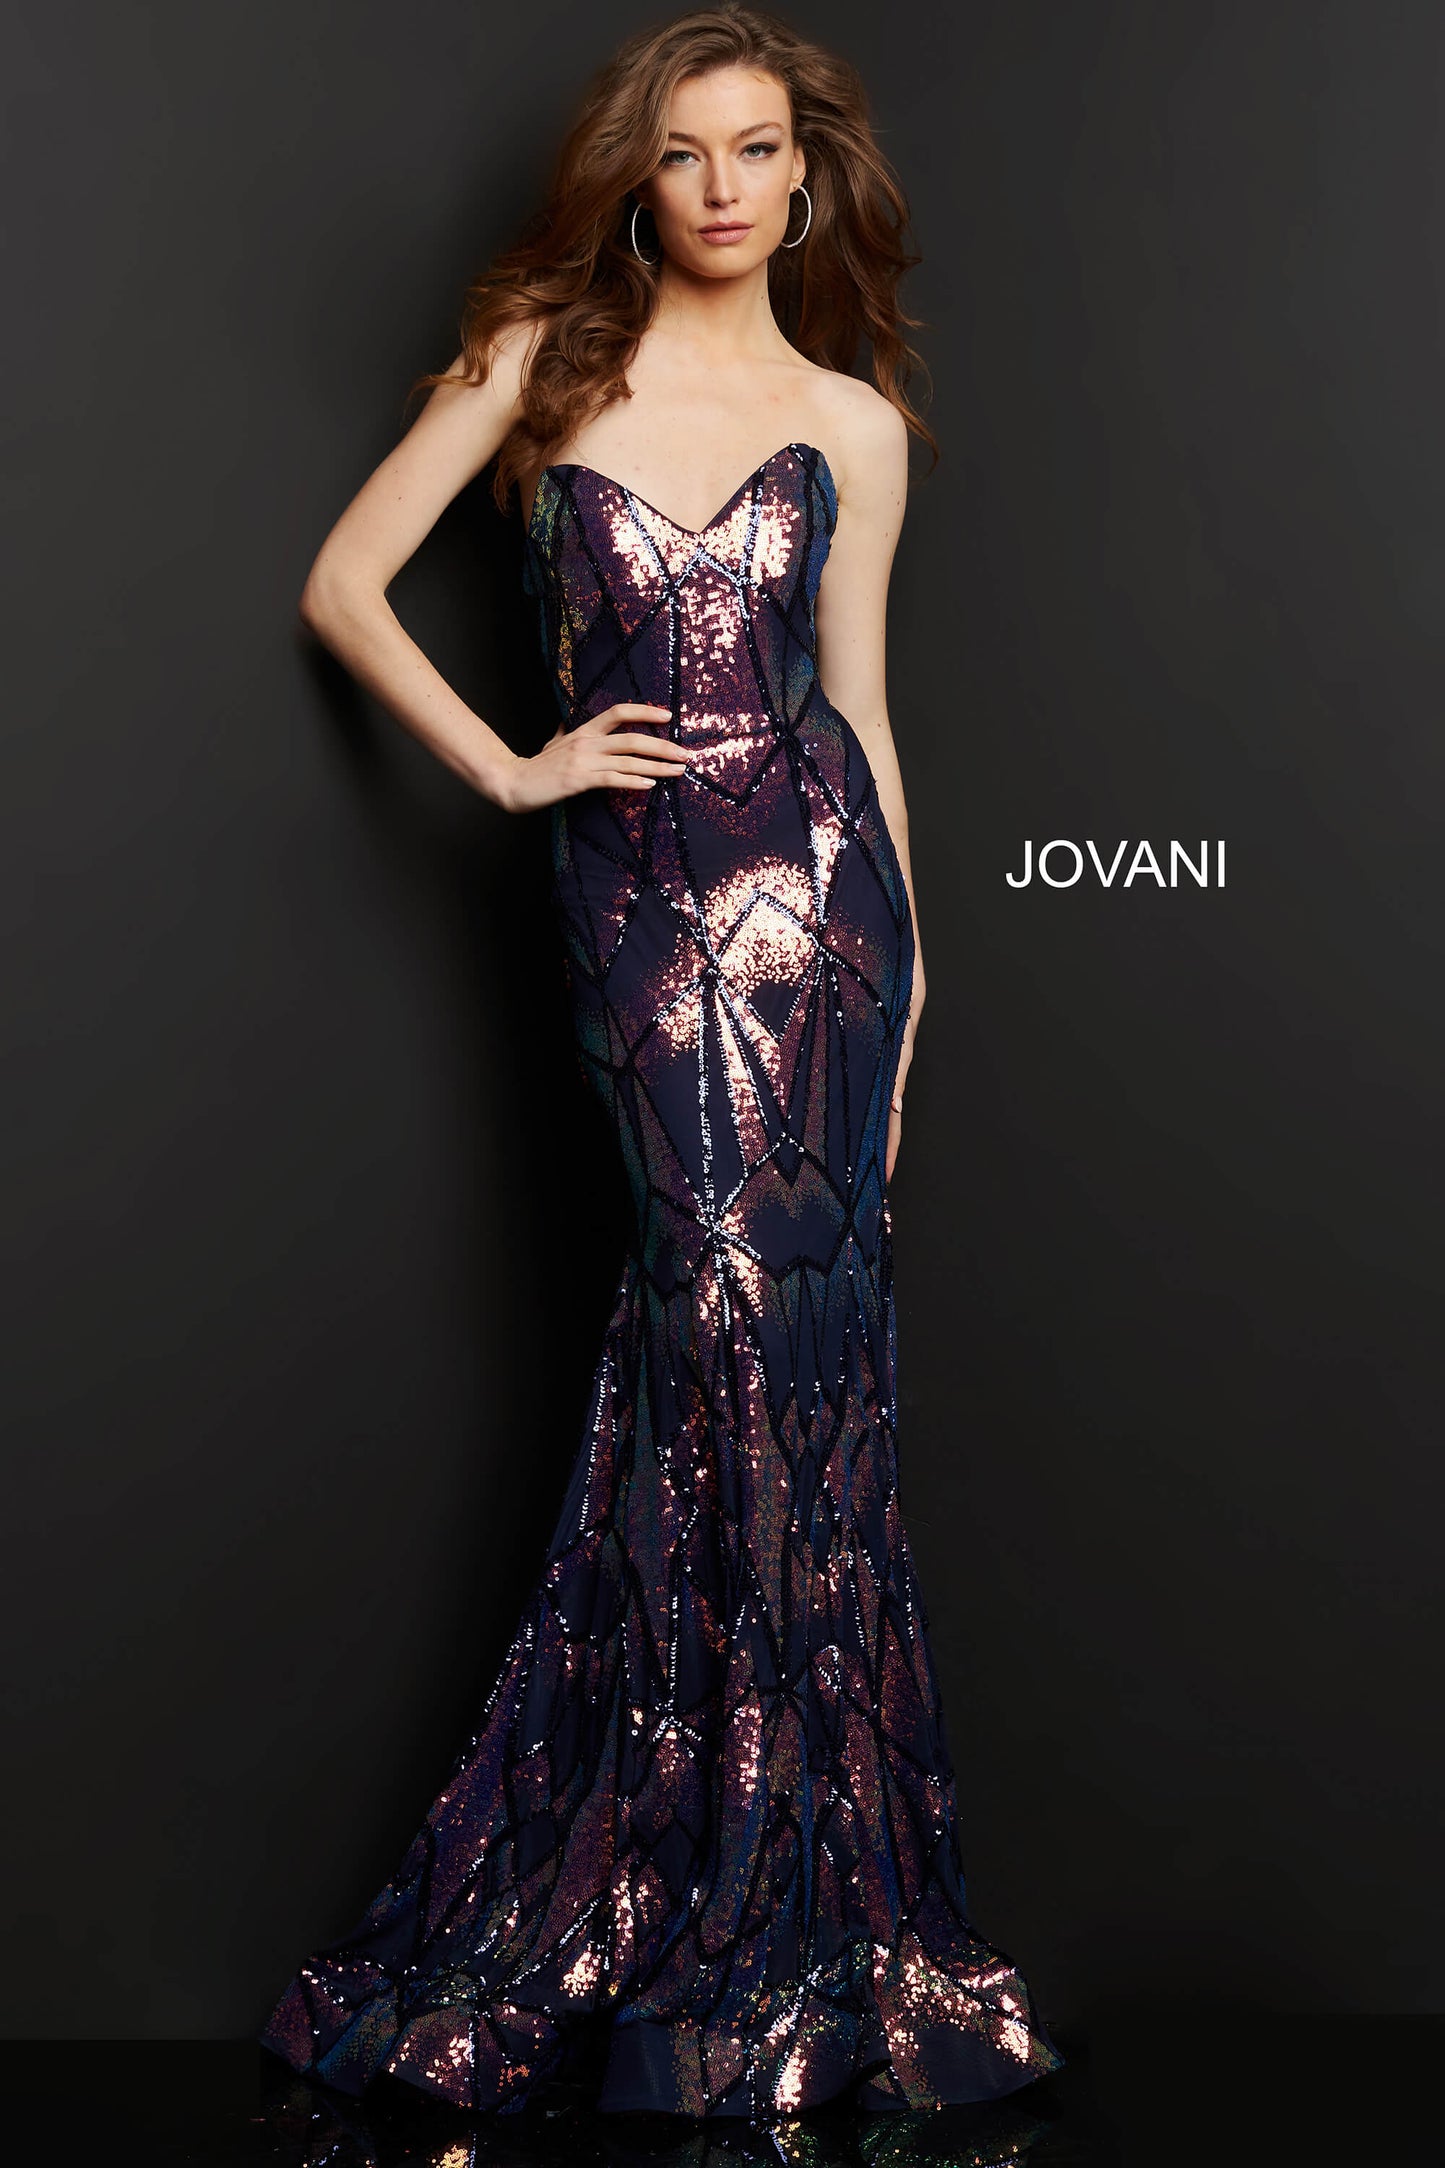 Jovani 05100 is a long Fitted formal evening gown. Featuring a strapless peak - deep sweetheart neckline. This stunning Pageant & Prom Gown is Fully Embellished with Glitter & Sequins to Create A Glamorous Geometric dimensional design. Mermaid silhouette with a lush trumpet skirt & sweeping train.   Available Sizes: 00,0,2,4,6,8,10,12,14,16,18,20,22,24  Available Colors: black/multi, light-blue, navy, pink